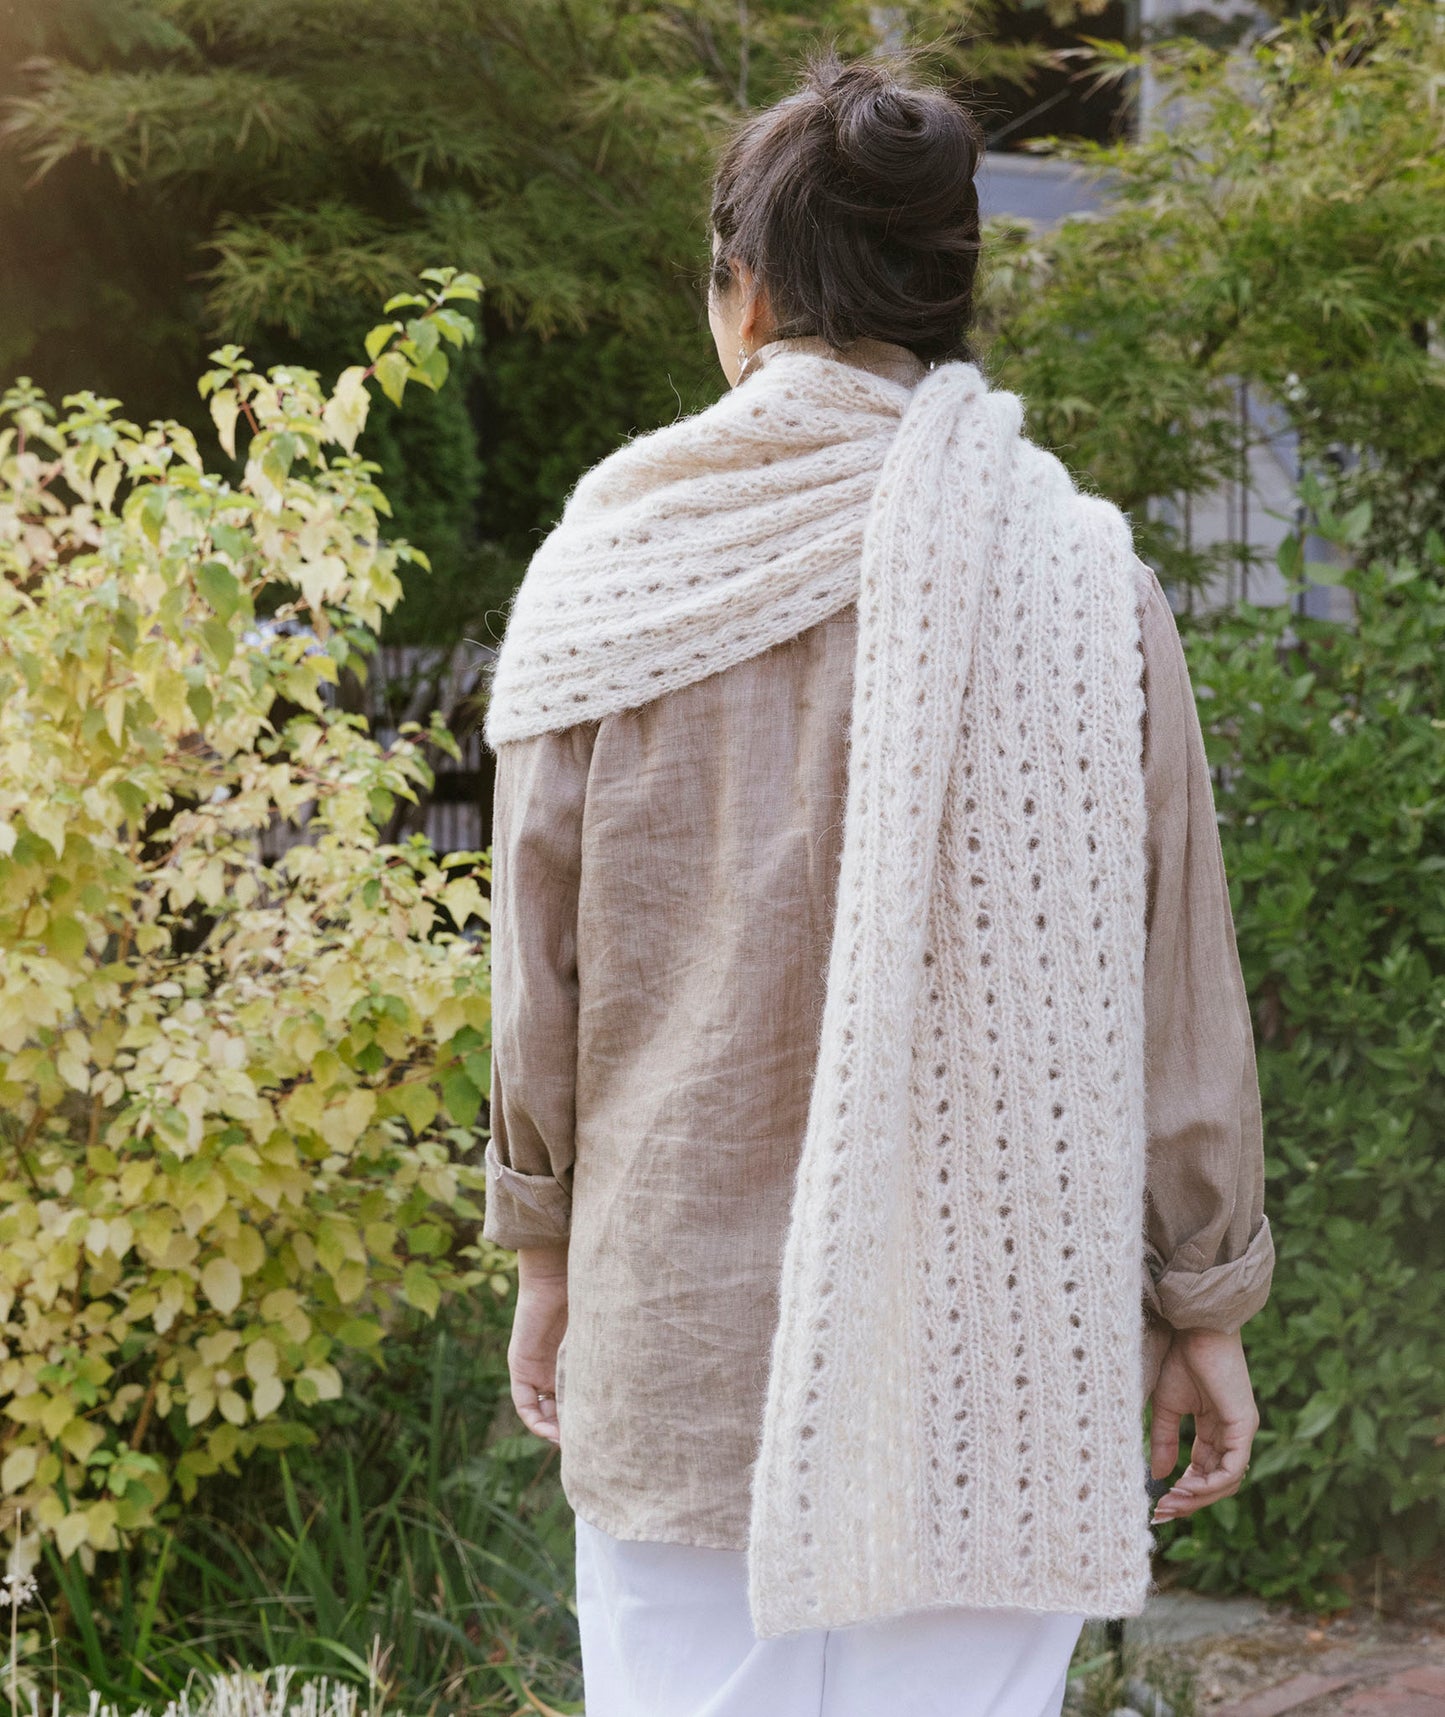 Ribbed Lace Scarf Using Isager Soft